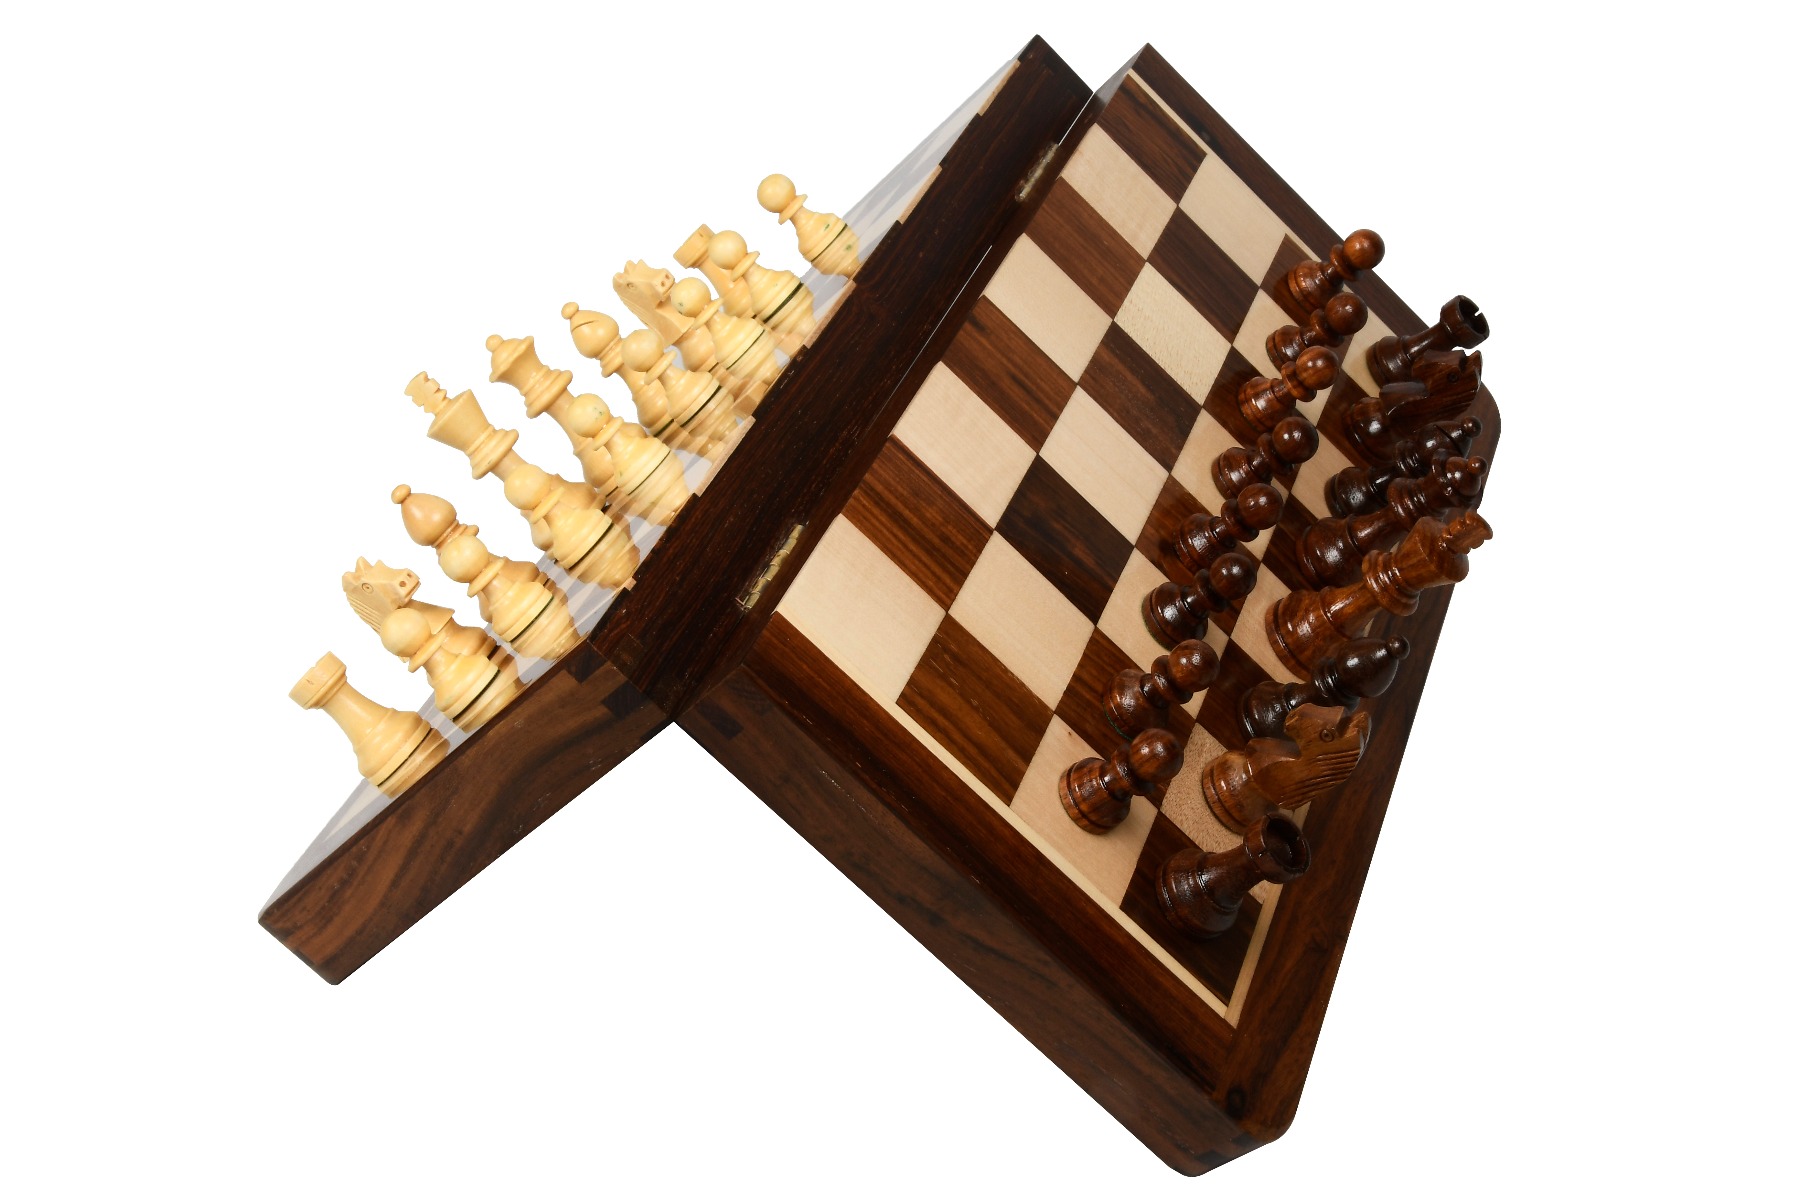 Magnetic Chess Hand Crafted Travel Set With Wooden Board Folding Chessboard Game 